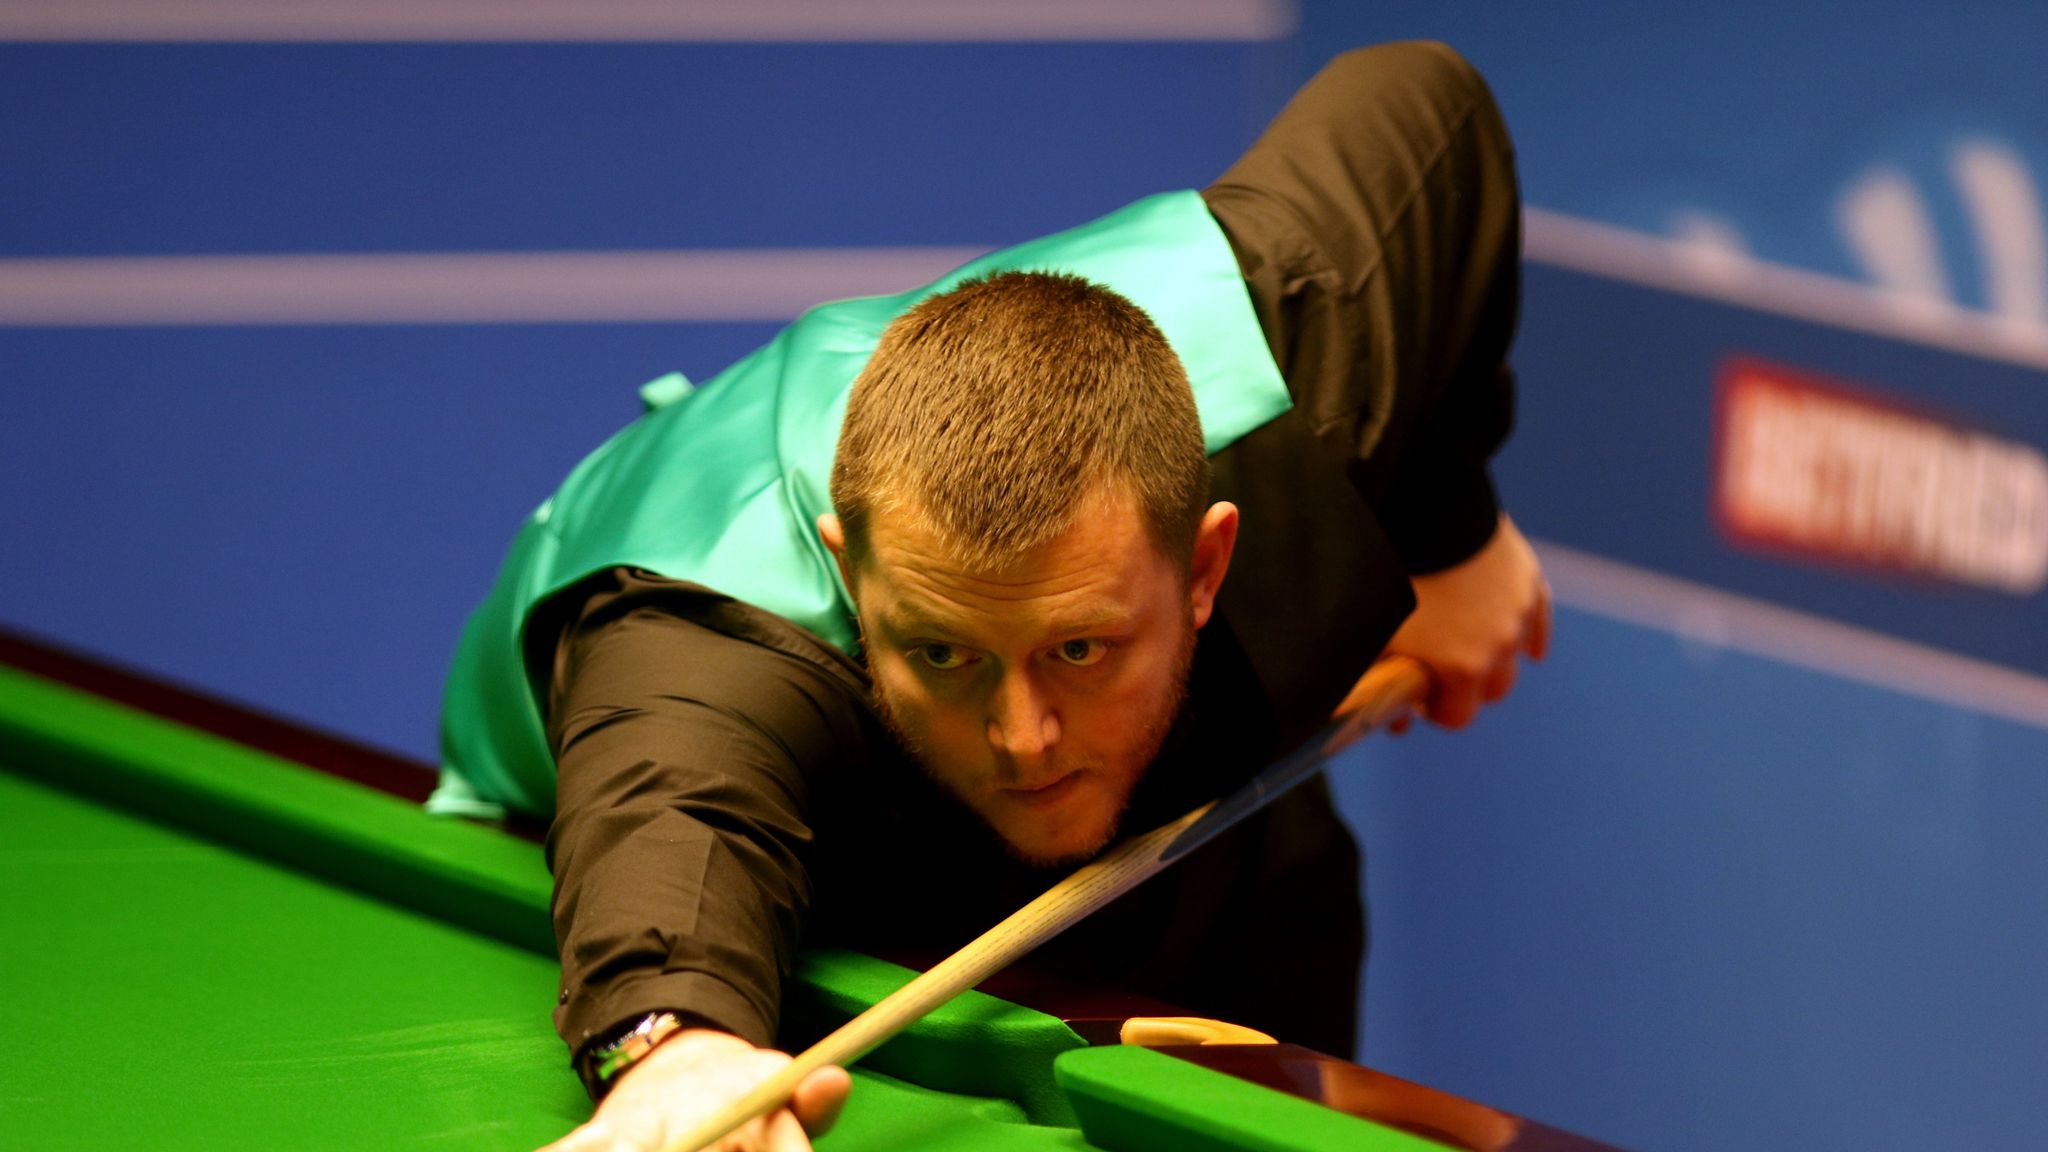 Mark Allen faces fine from World Snooker for conceding frame early Snooker News Sky Sports